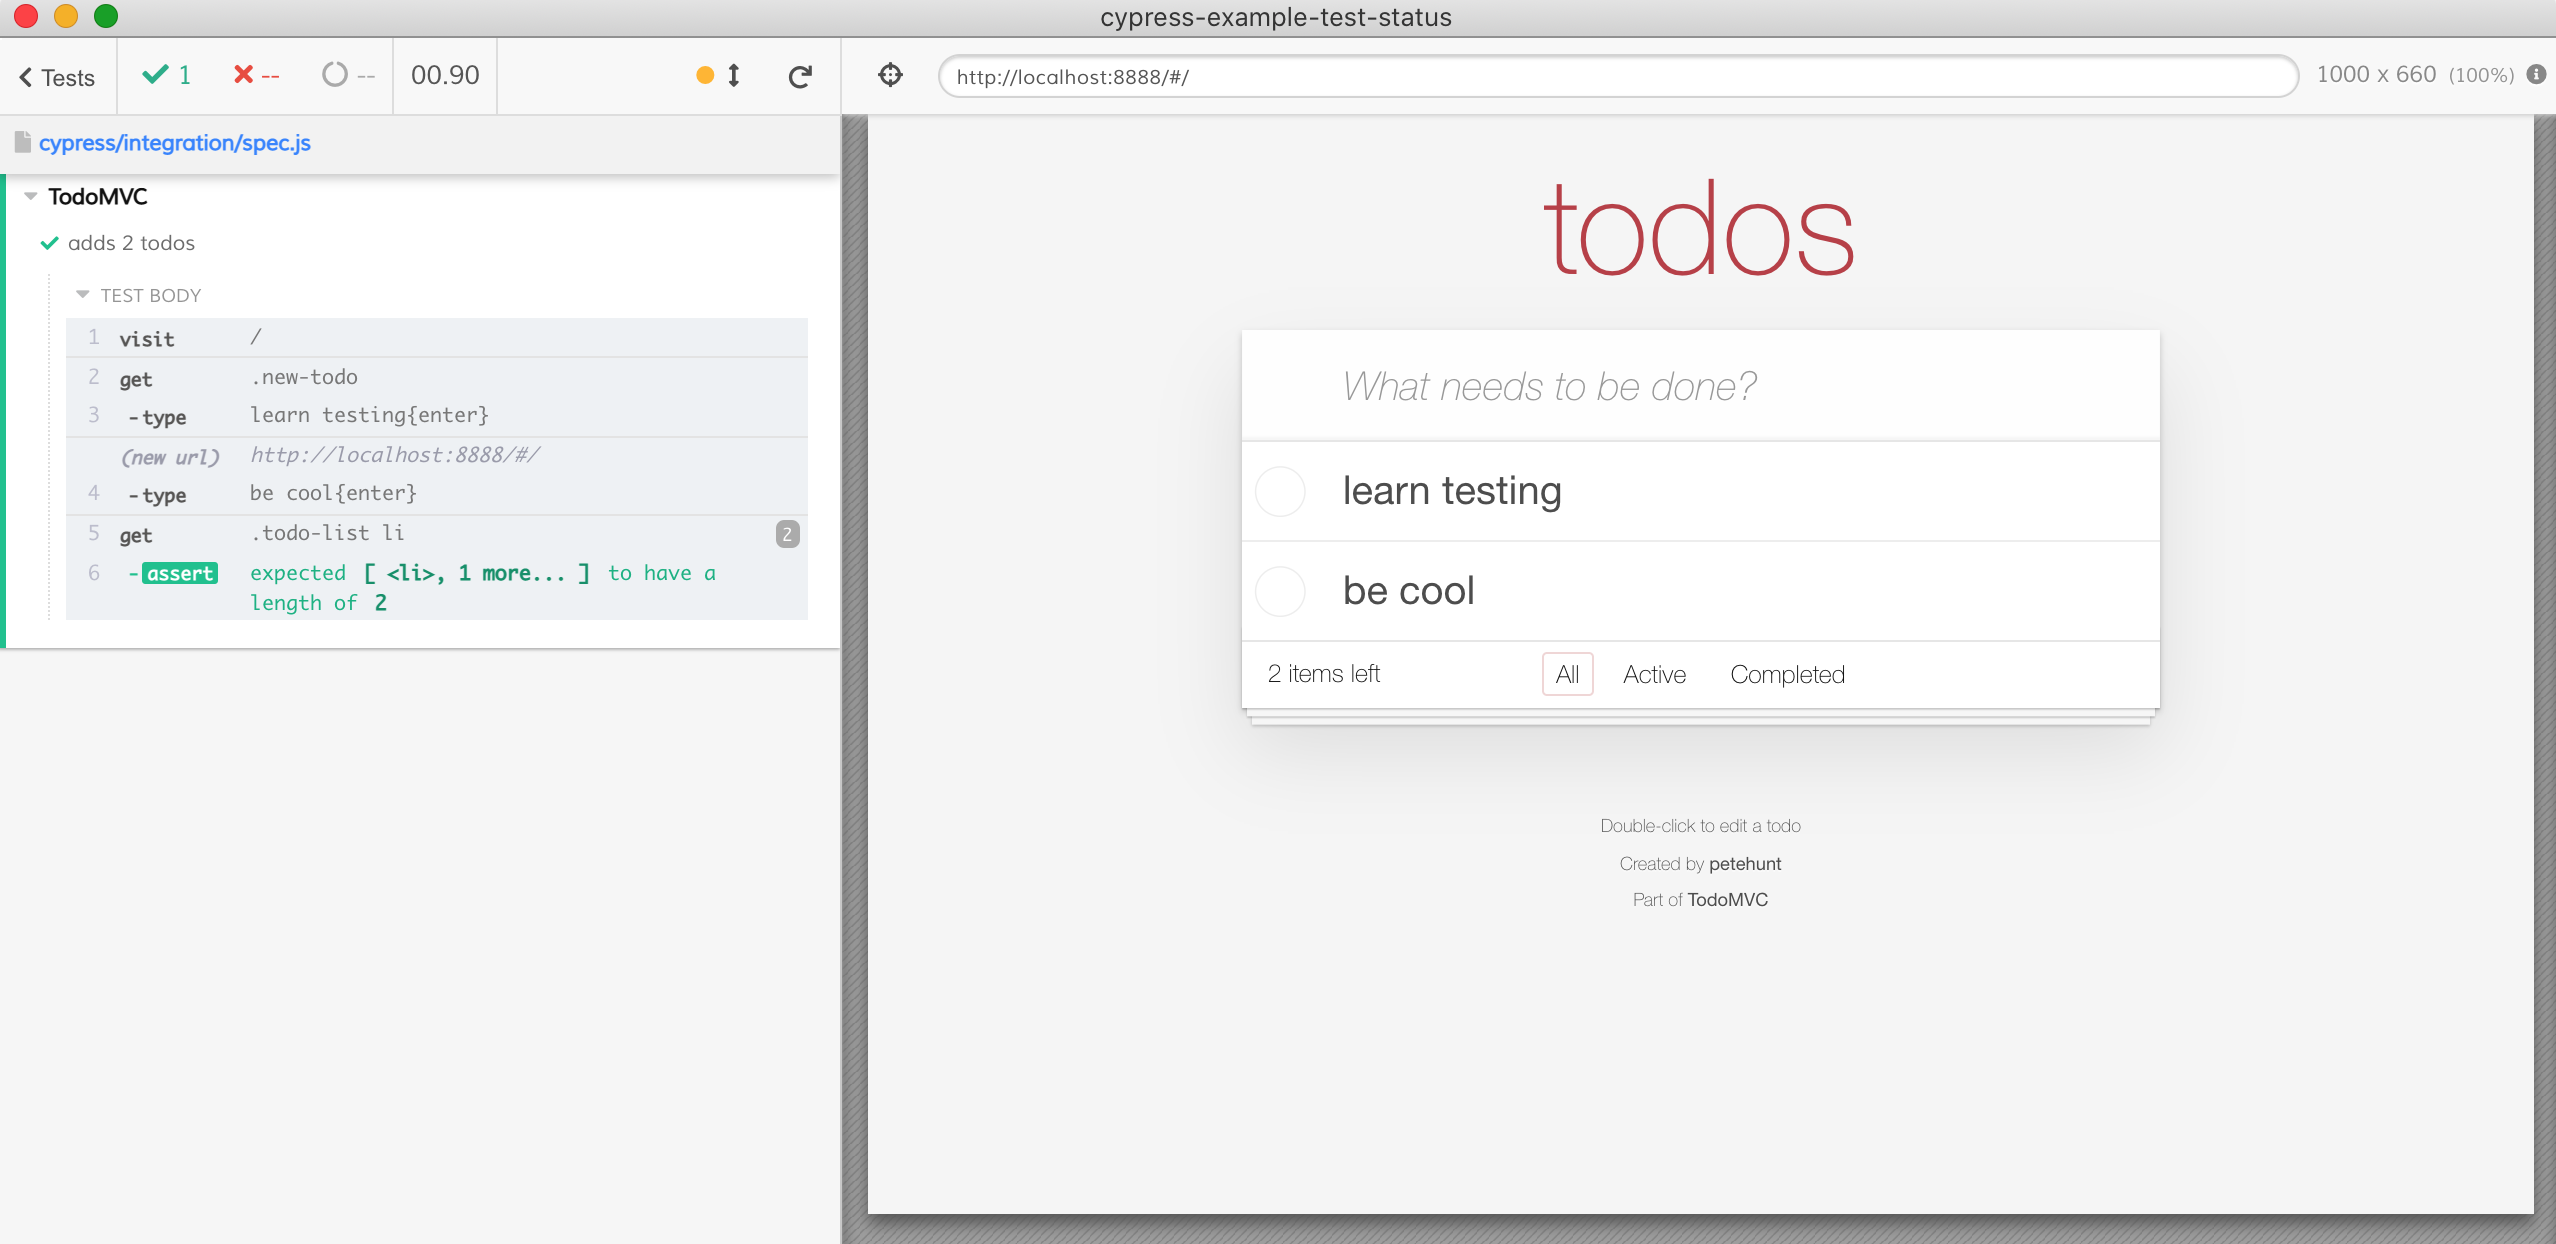 The first test adds new todos